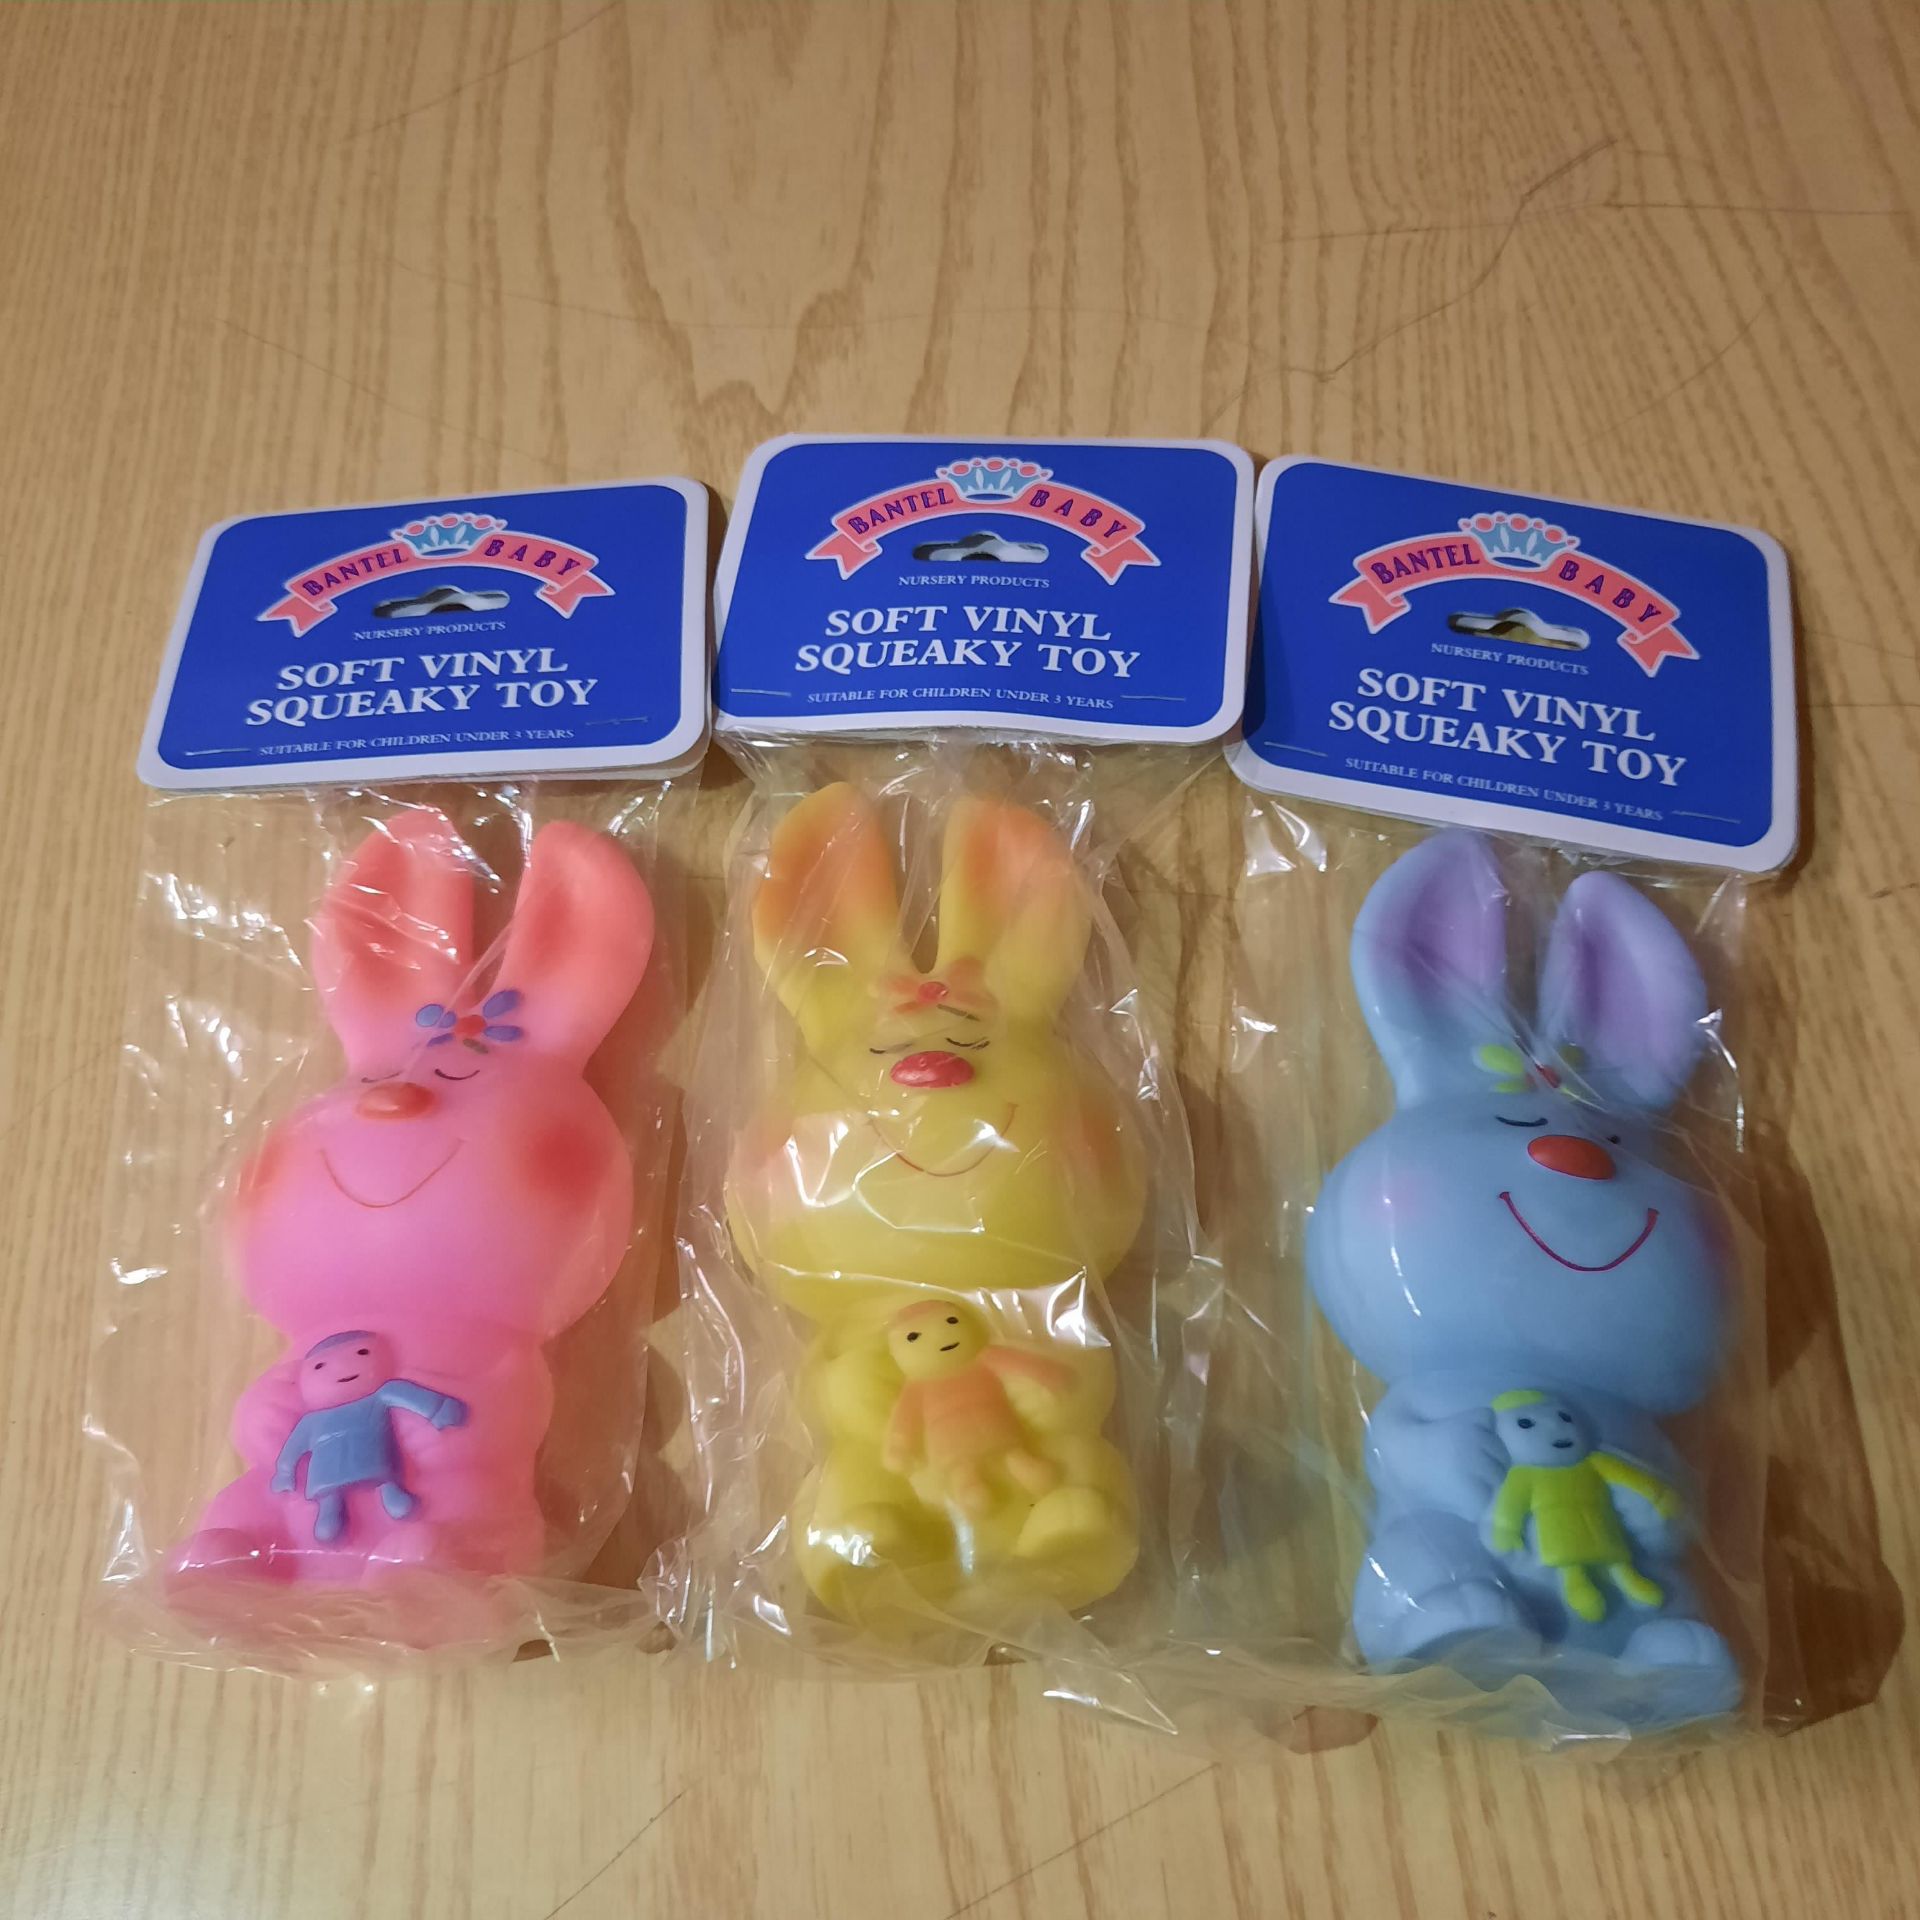 X 24 BRAND NEW AND INDIVIDUALLY PACKAGED SOFT VINYL SQUEACKY TOY.